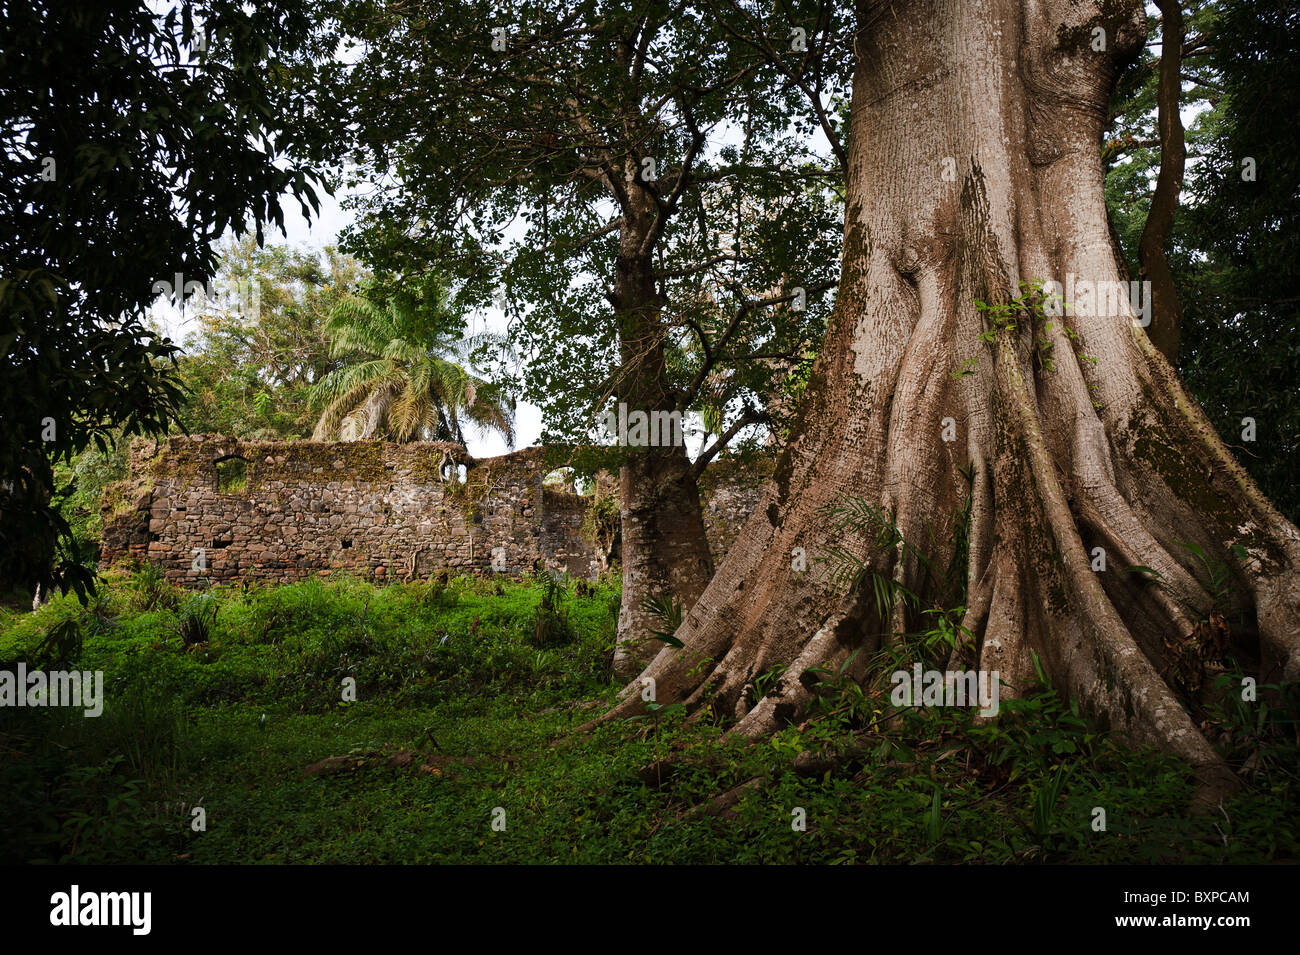 Buttressed tree and ruined walls, Bunce Island, Sierra Leone. Stock Photo